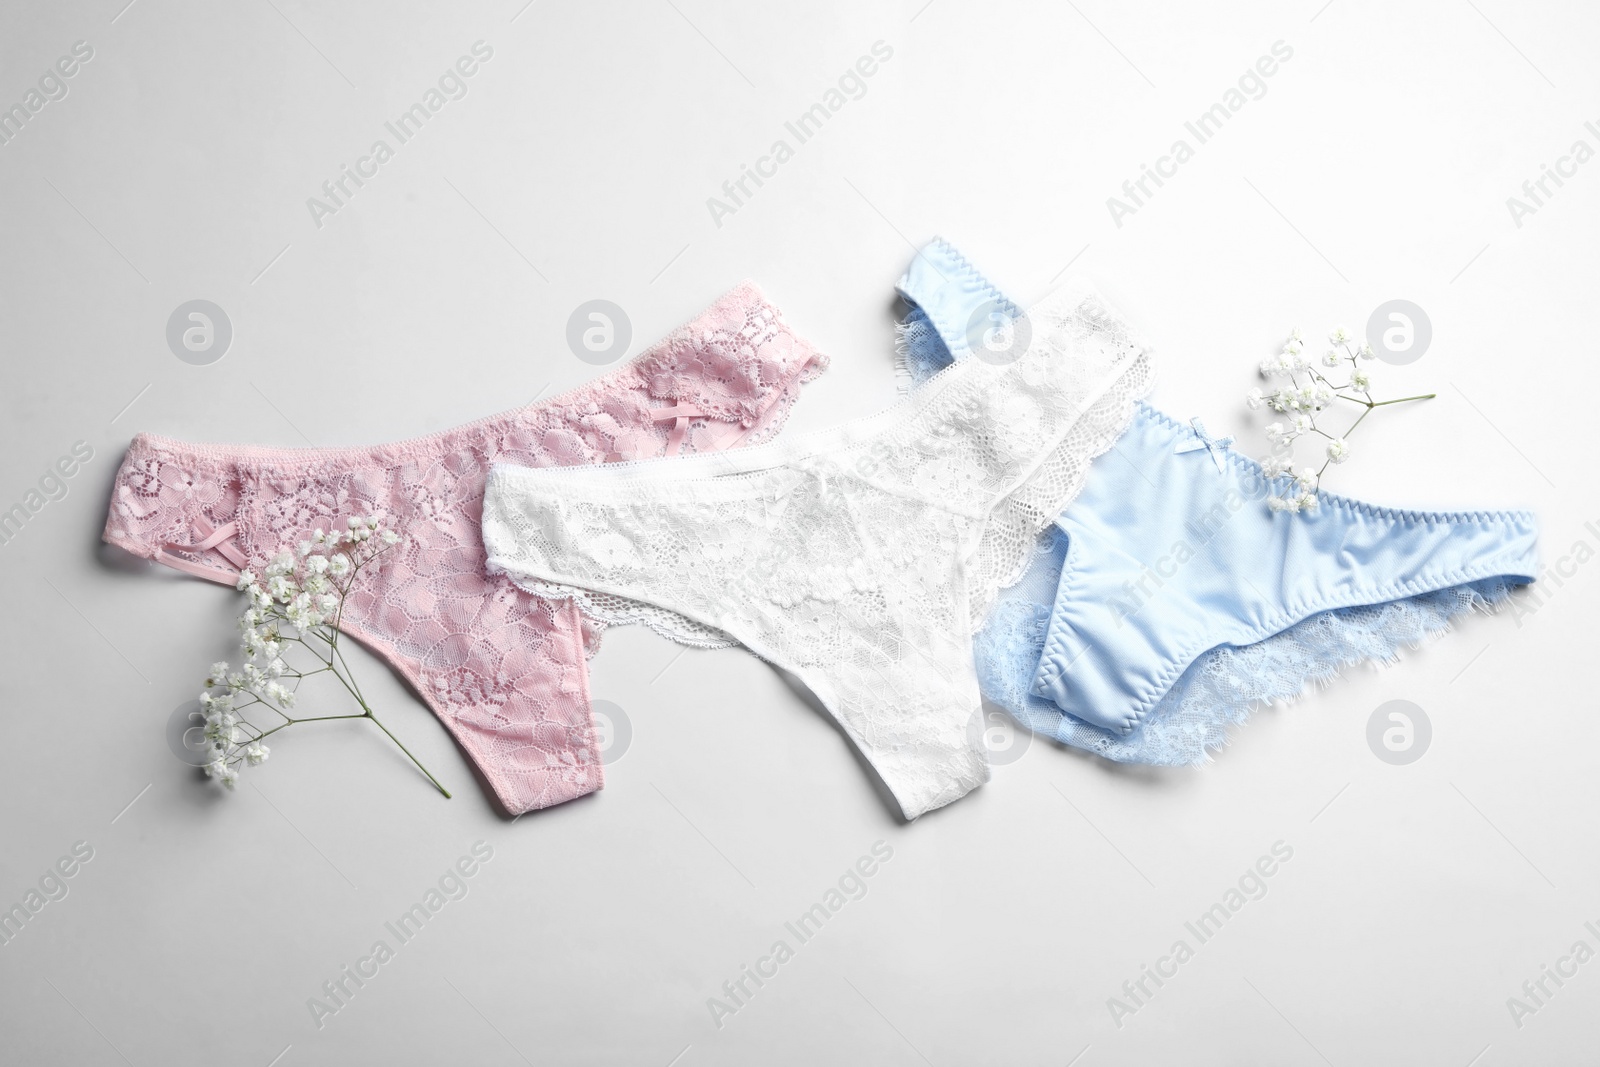 Photo of Women's underwear and flowers on white background, flat lay